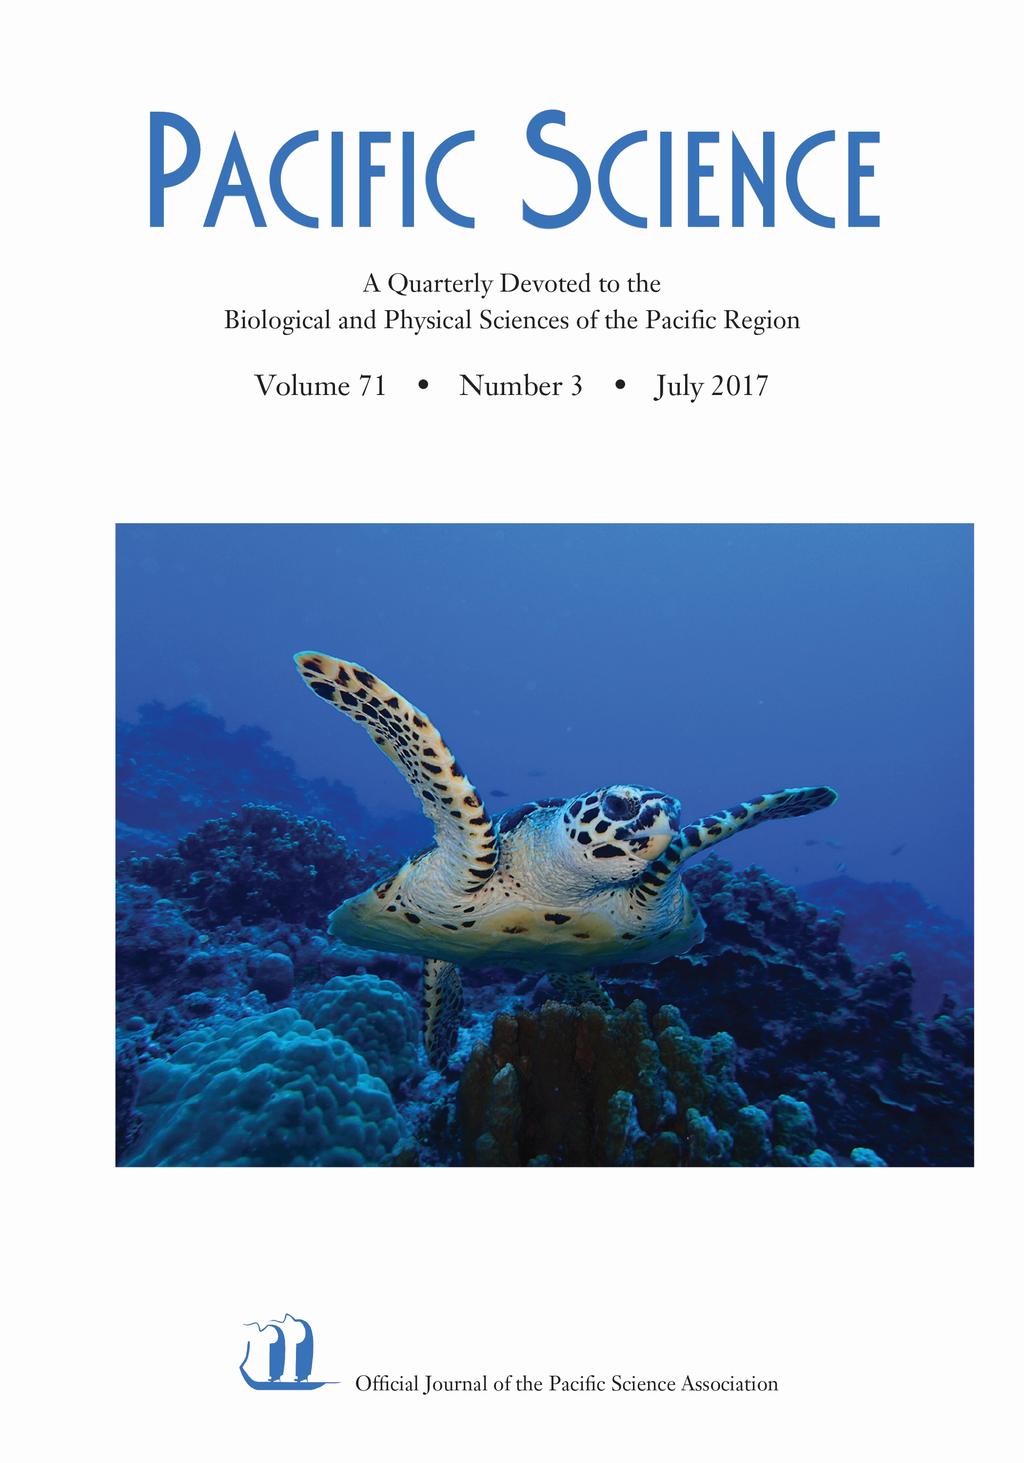 Appearing quarterly since 1947, Pacific Science is an international, multidisciplinary journal reporting research on the biological and physical sciences of the Pacific basin.